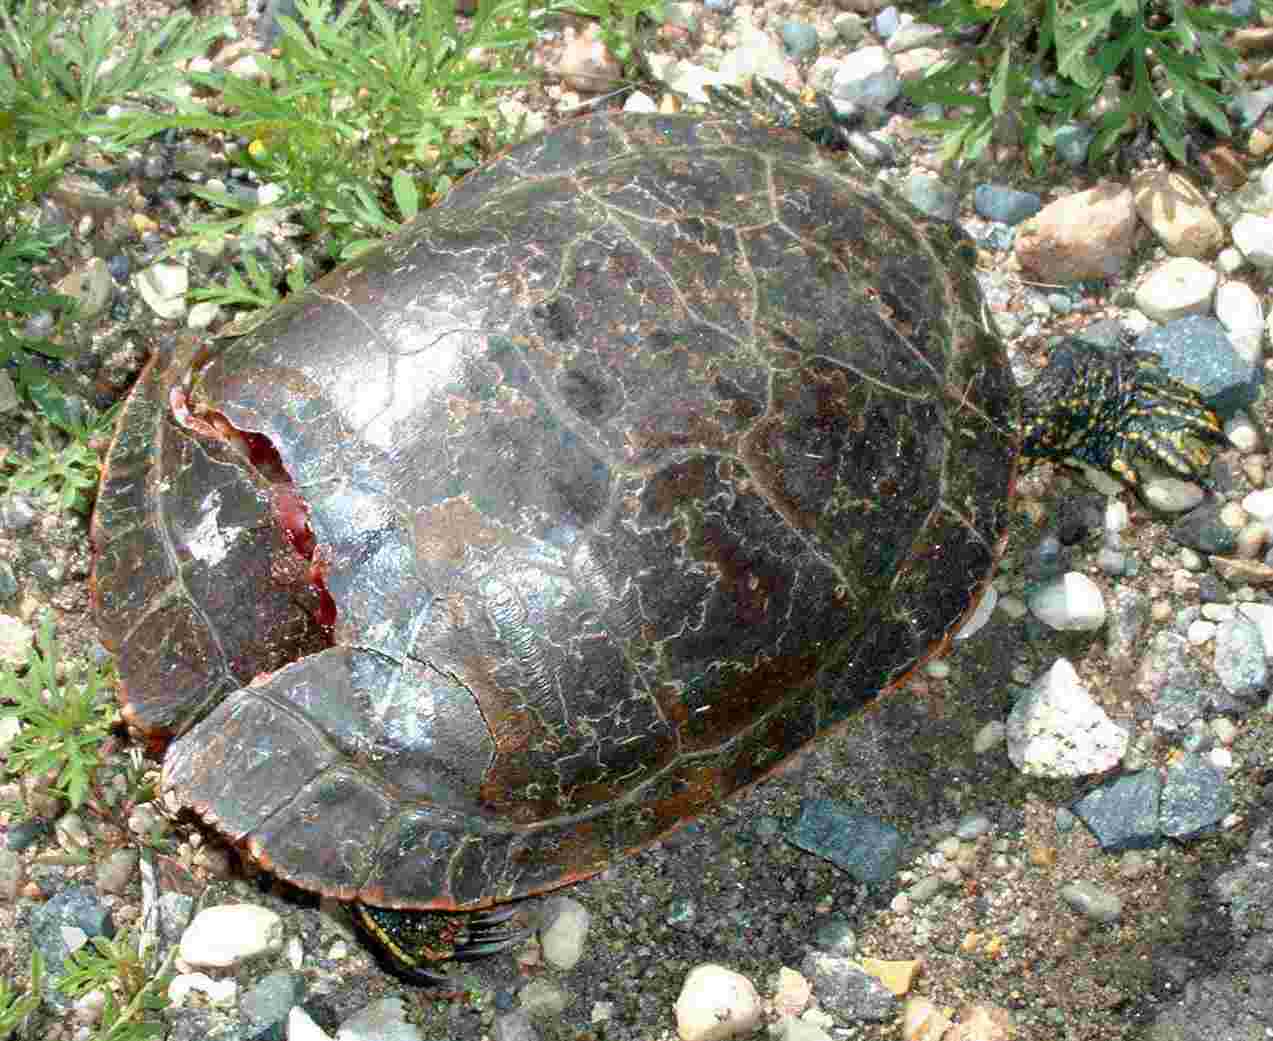 Injured painted turtle on White Earth Indian Reservation